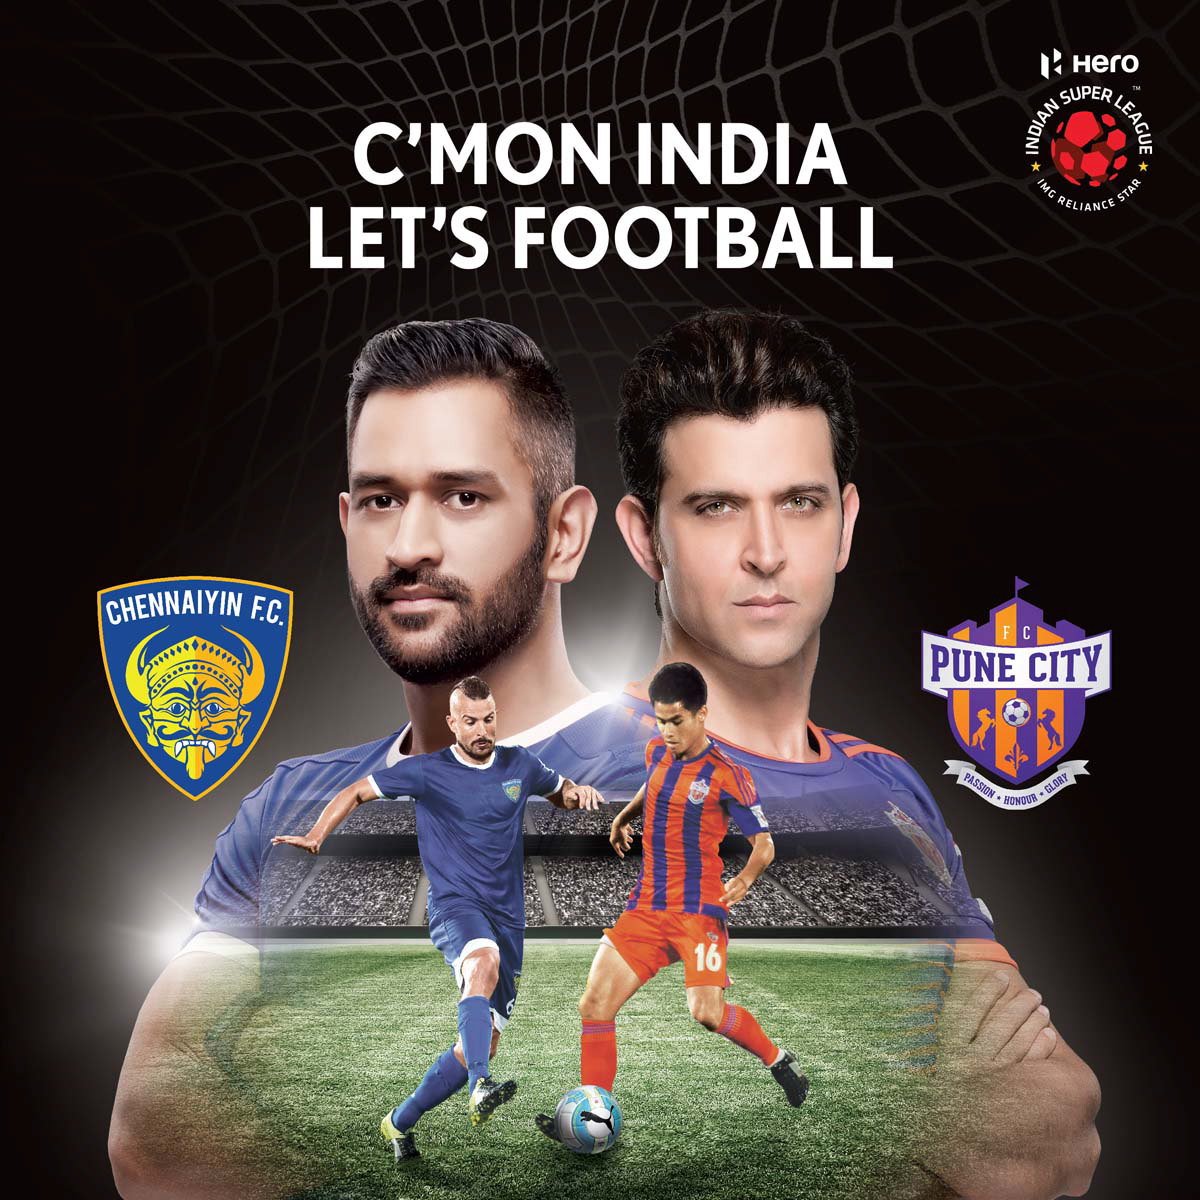 Indian Super League, Football League,Sport Photography, Crickerter Photoshoot, Shooting with Celebrity, Sport Photographer, Sports, Football, Passionate, Commissioned Photography, Best Advertising Photographer by Vikram Bawa, Mumbai, India